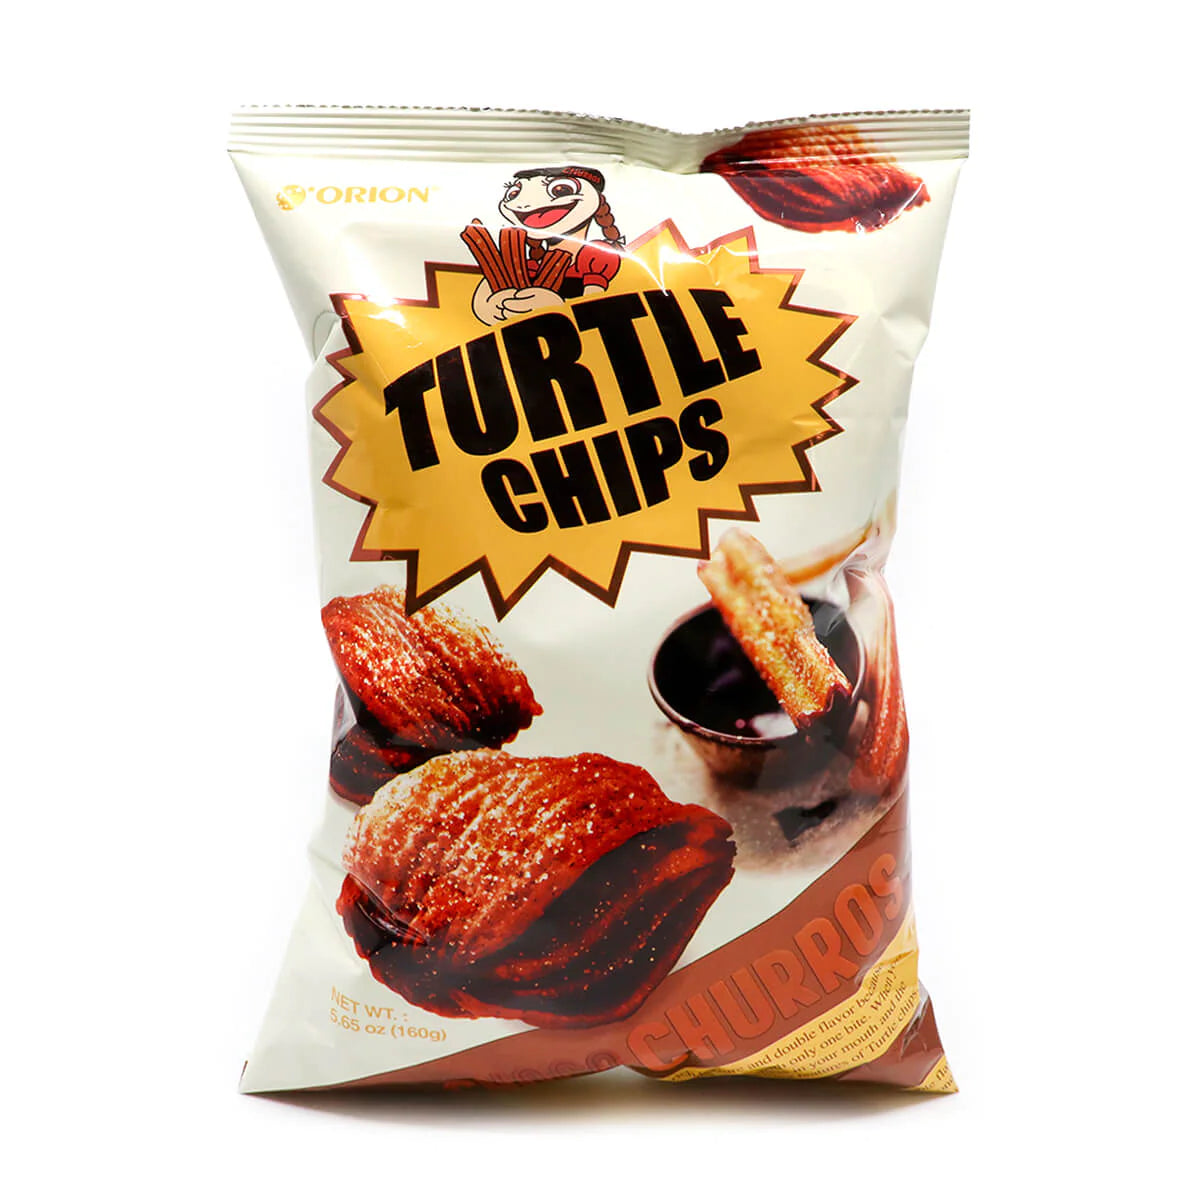 Orion Choco Churro Turtle Chips - 160g